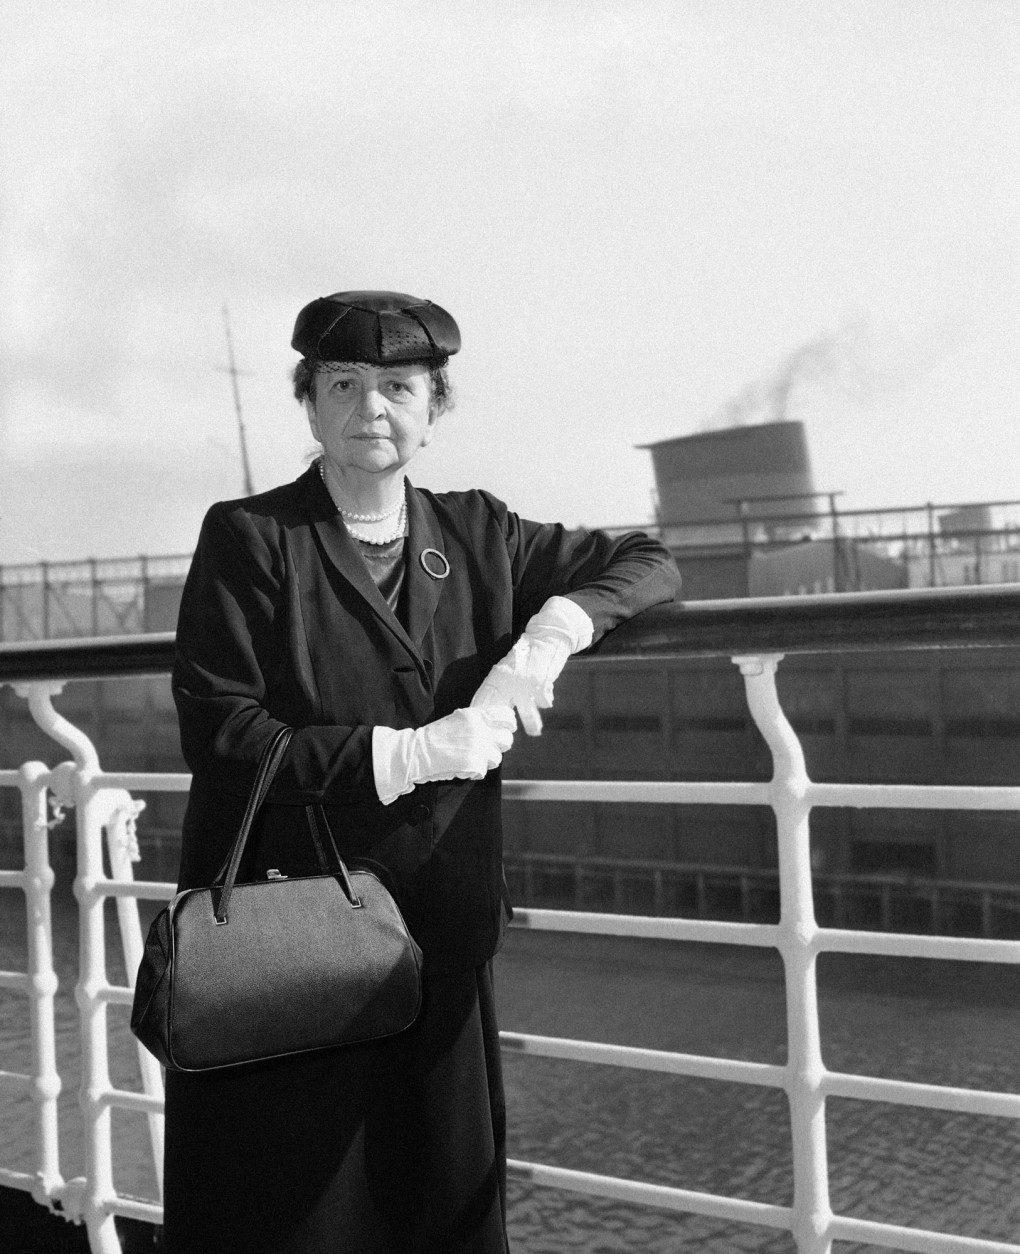 Frances Perkins, who celebrated her 70th birthday last April, is about to step out of a Washington career that began in 1933. She has prepared her formal resignation as one of the three members of the Civil Service Commission. She served as Secretary of Labor from March 1933 to June 1945. At left, she is shown about the time when she returned from an International Labor Organization Conference at Geneva in 1952. (AP Photo)